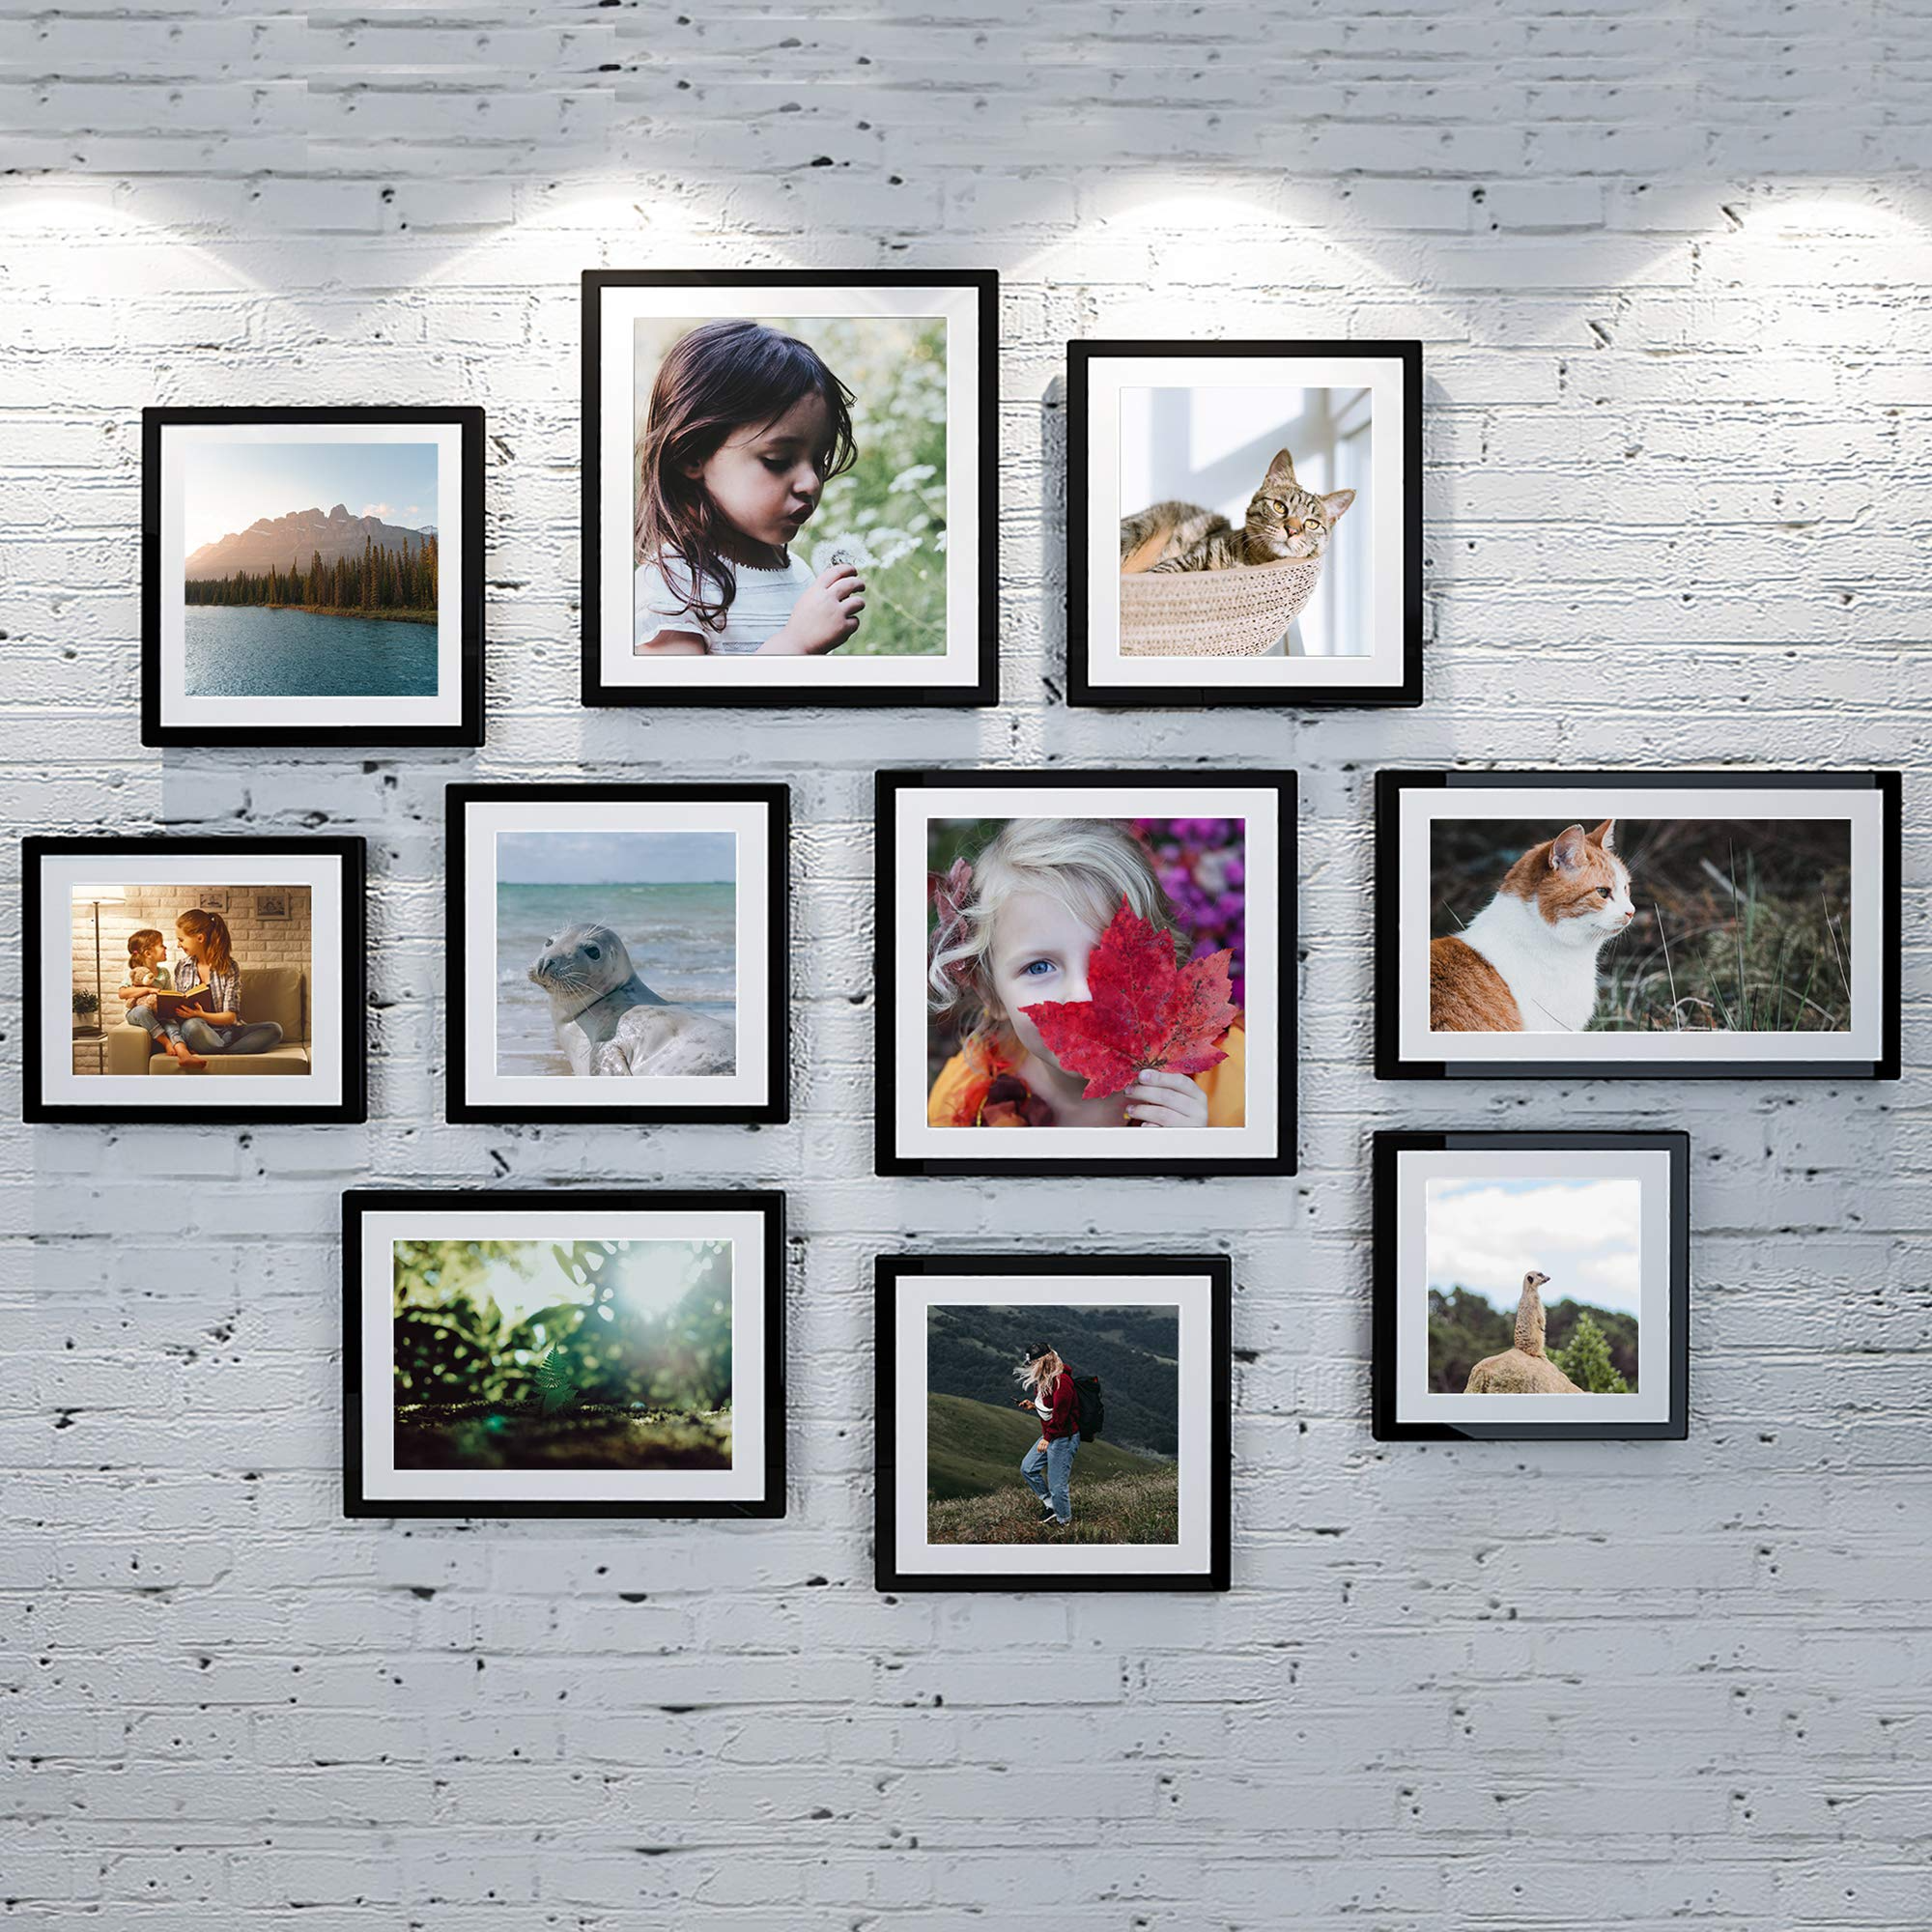 upsimples 8x12 Picture Frame Set of 5,Display Pictures 6x8 with